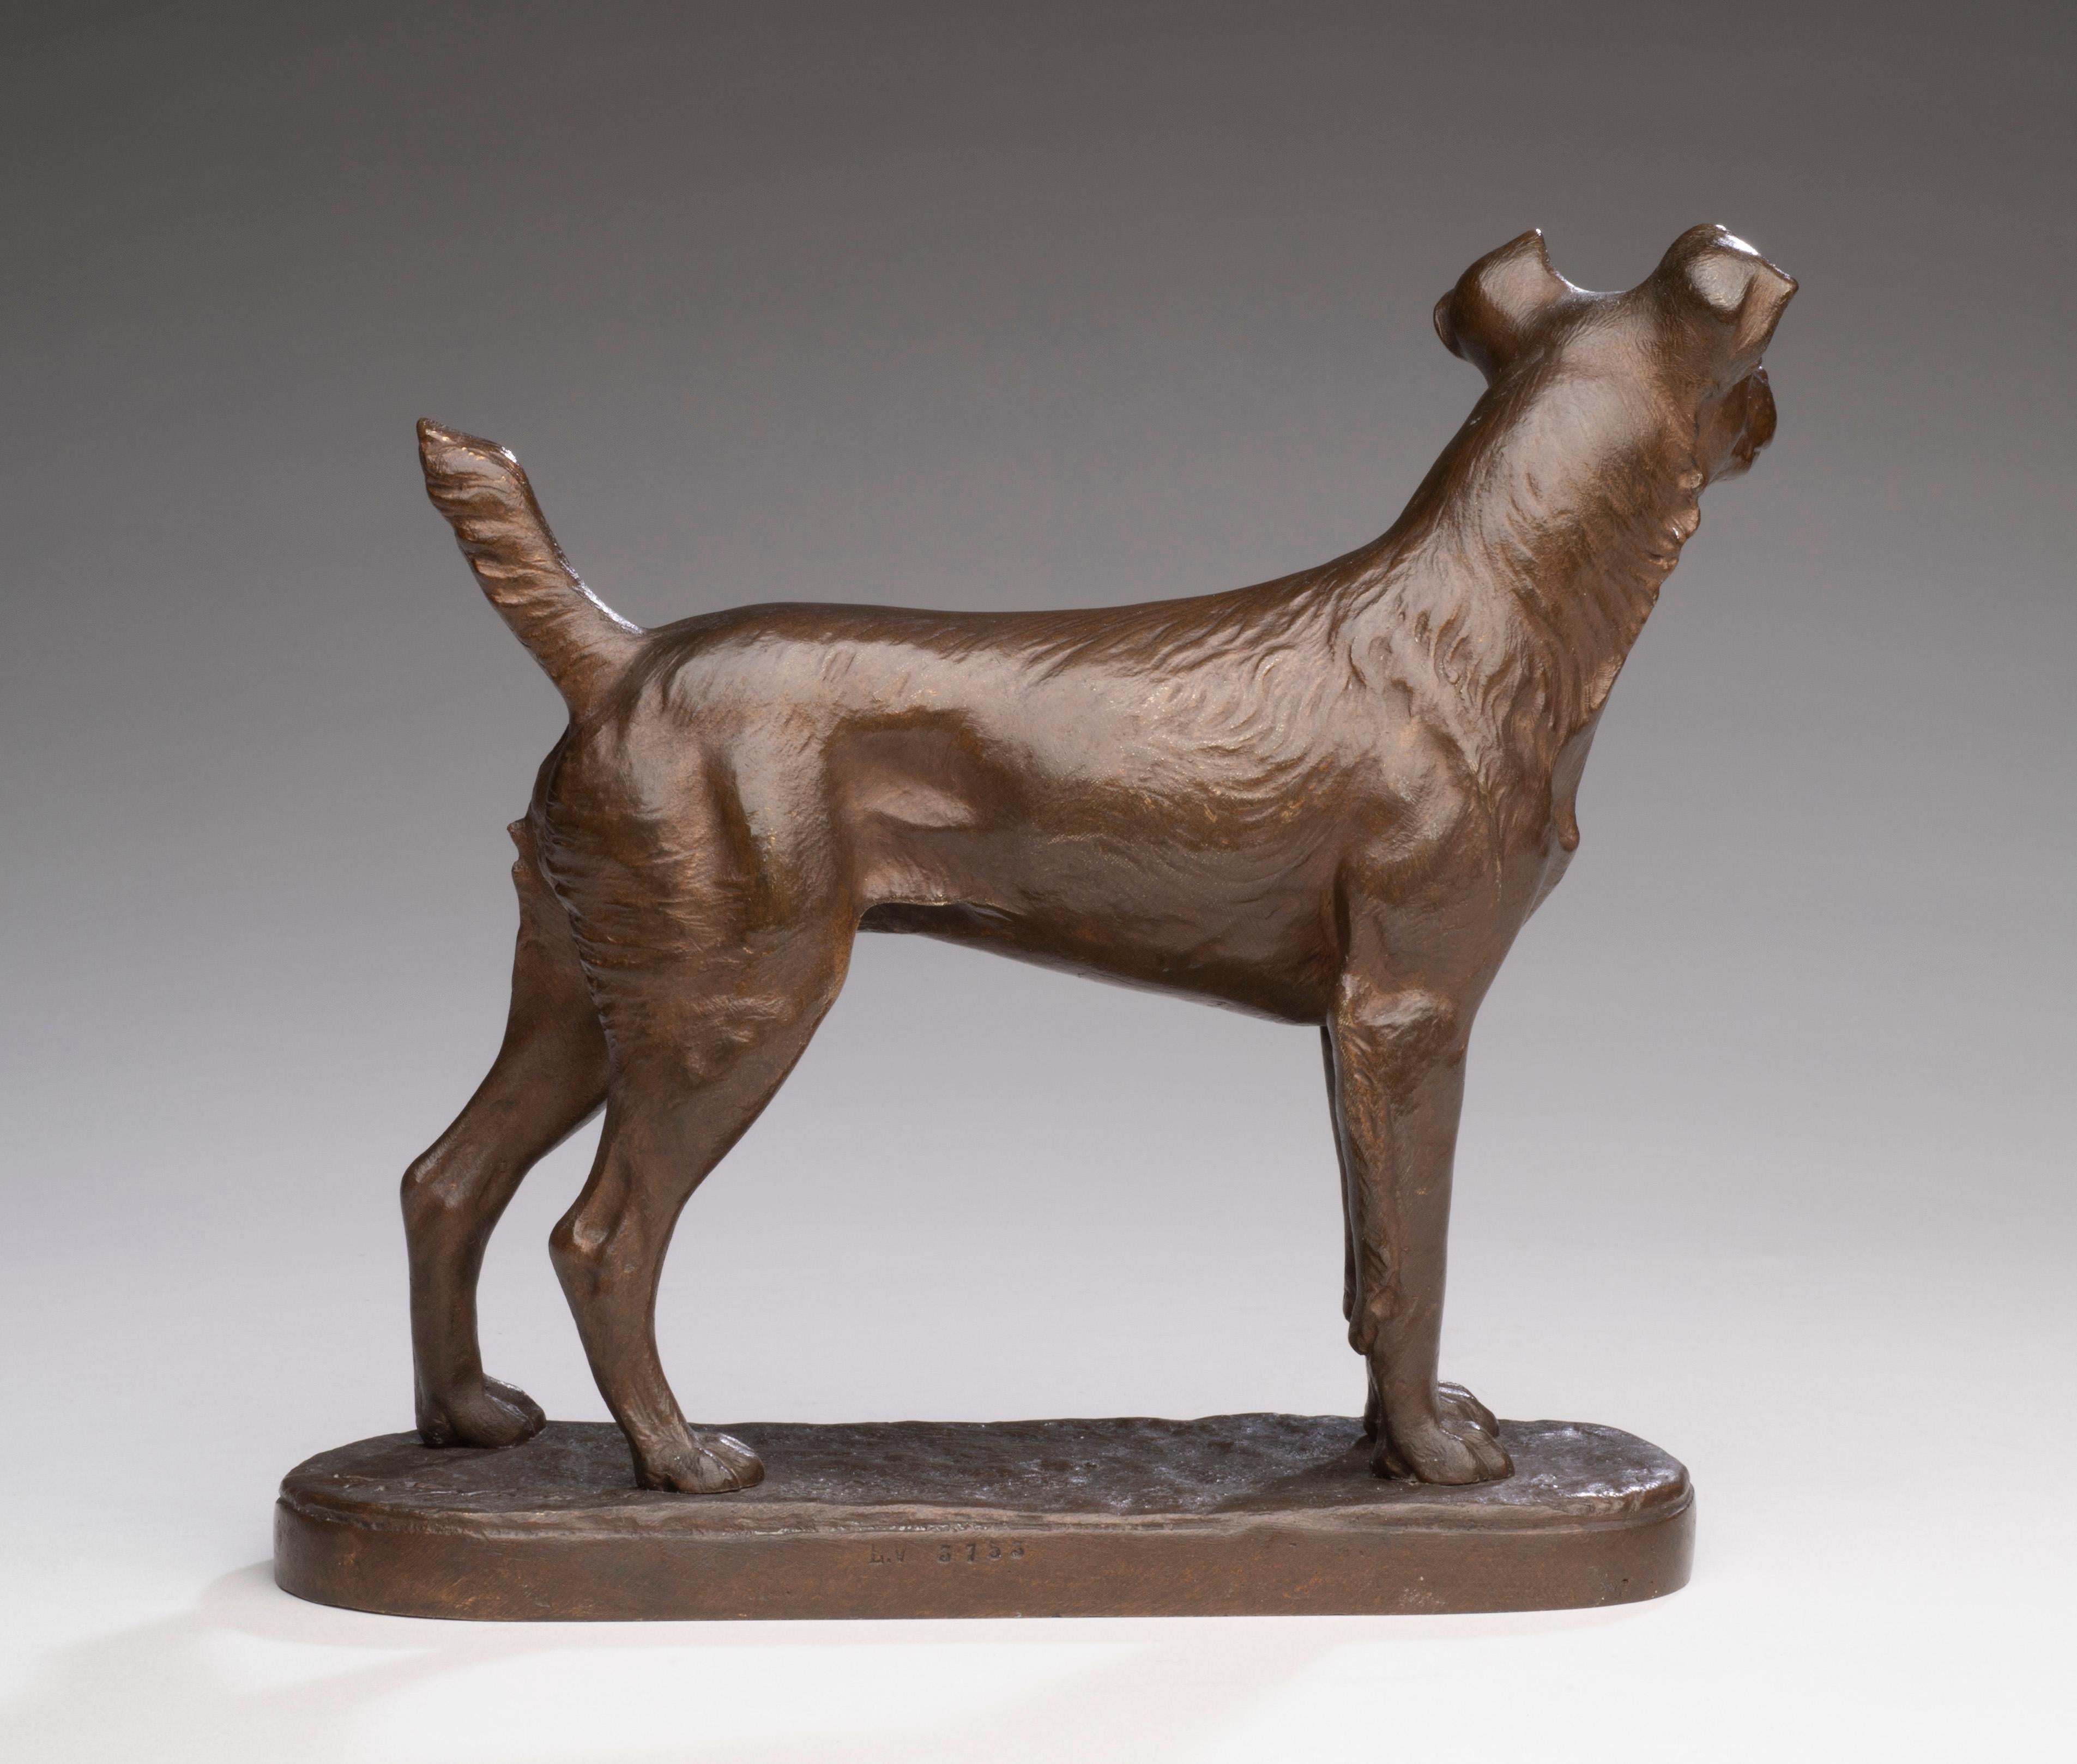 Antique Bronze Dog Portrait of a Terrier 
Pierre-Albert Laplanche (French, 1826-1873)
Signed in script to base 